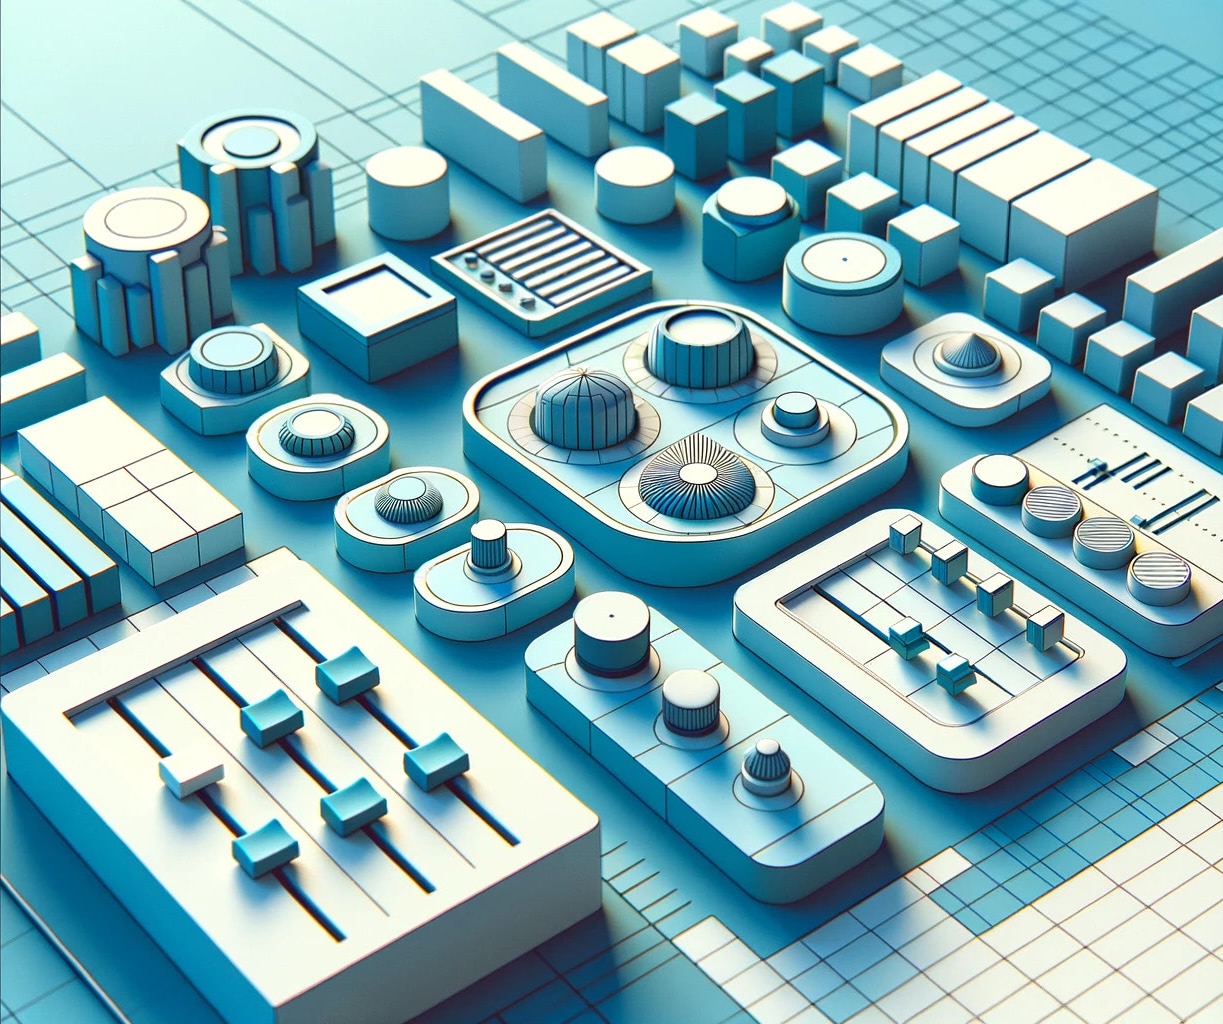 Minimalistic, abstract 3D-like image of a dashboard in duotone sky blue and cyan, featuring stylized buttons, knobs, and sliders.